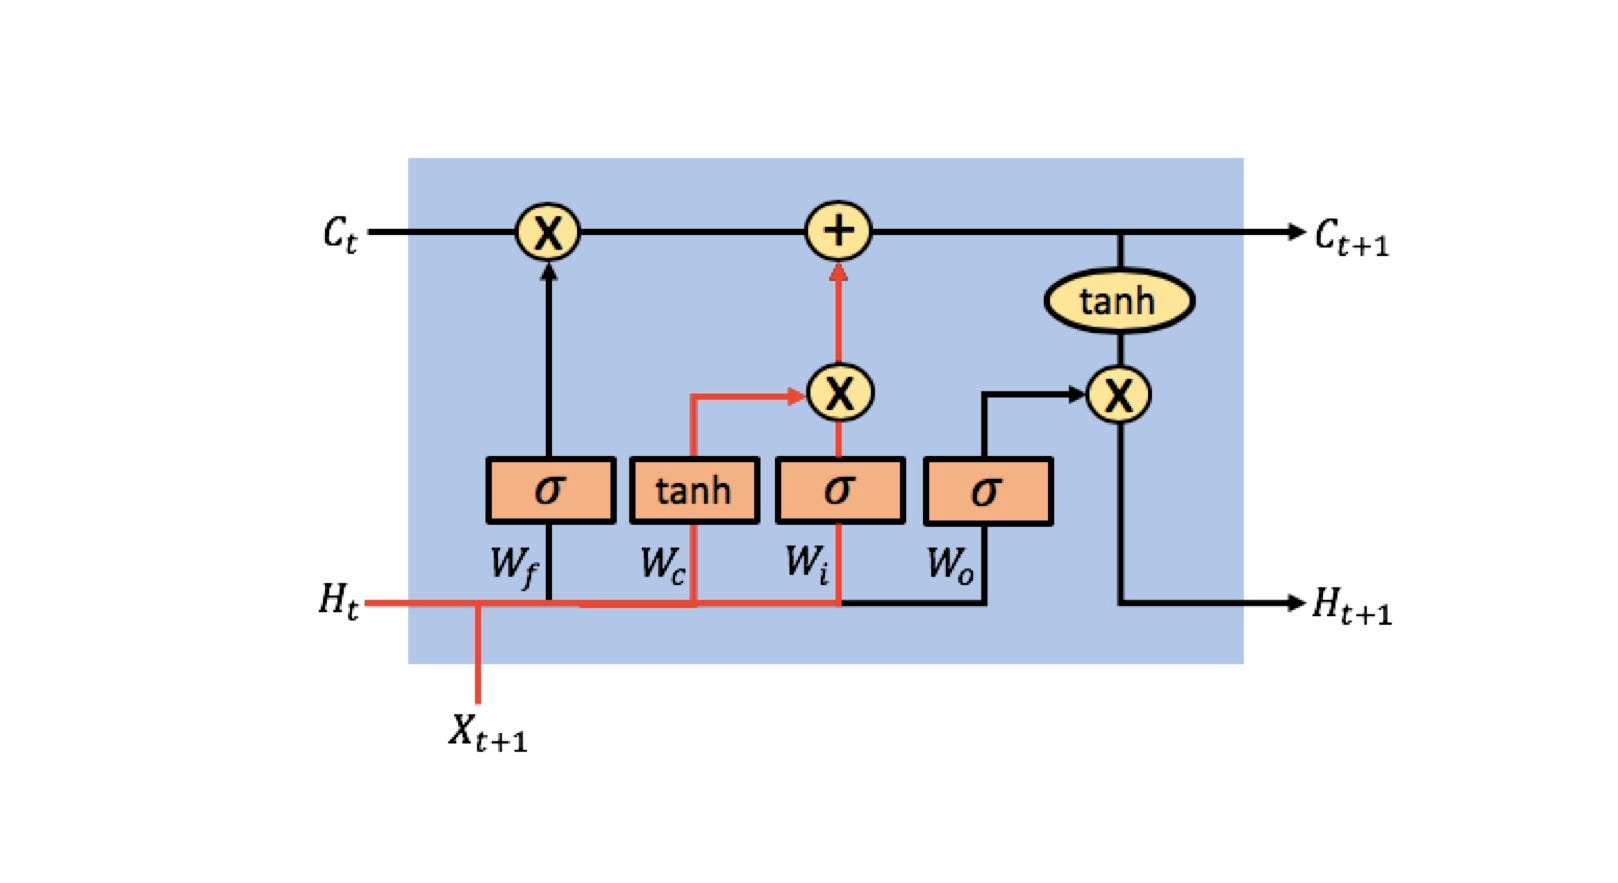 how lstm networks solve the problem of vanishing gradients